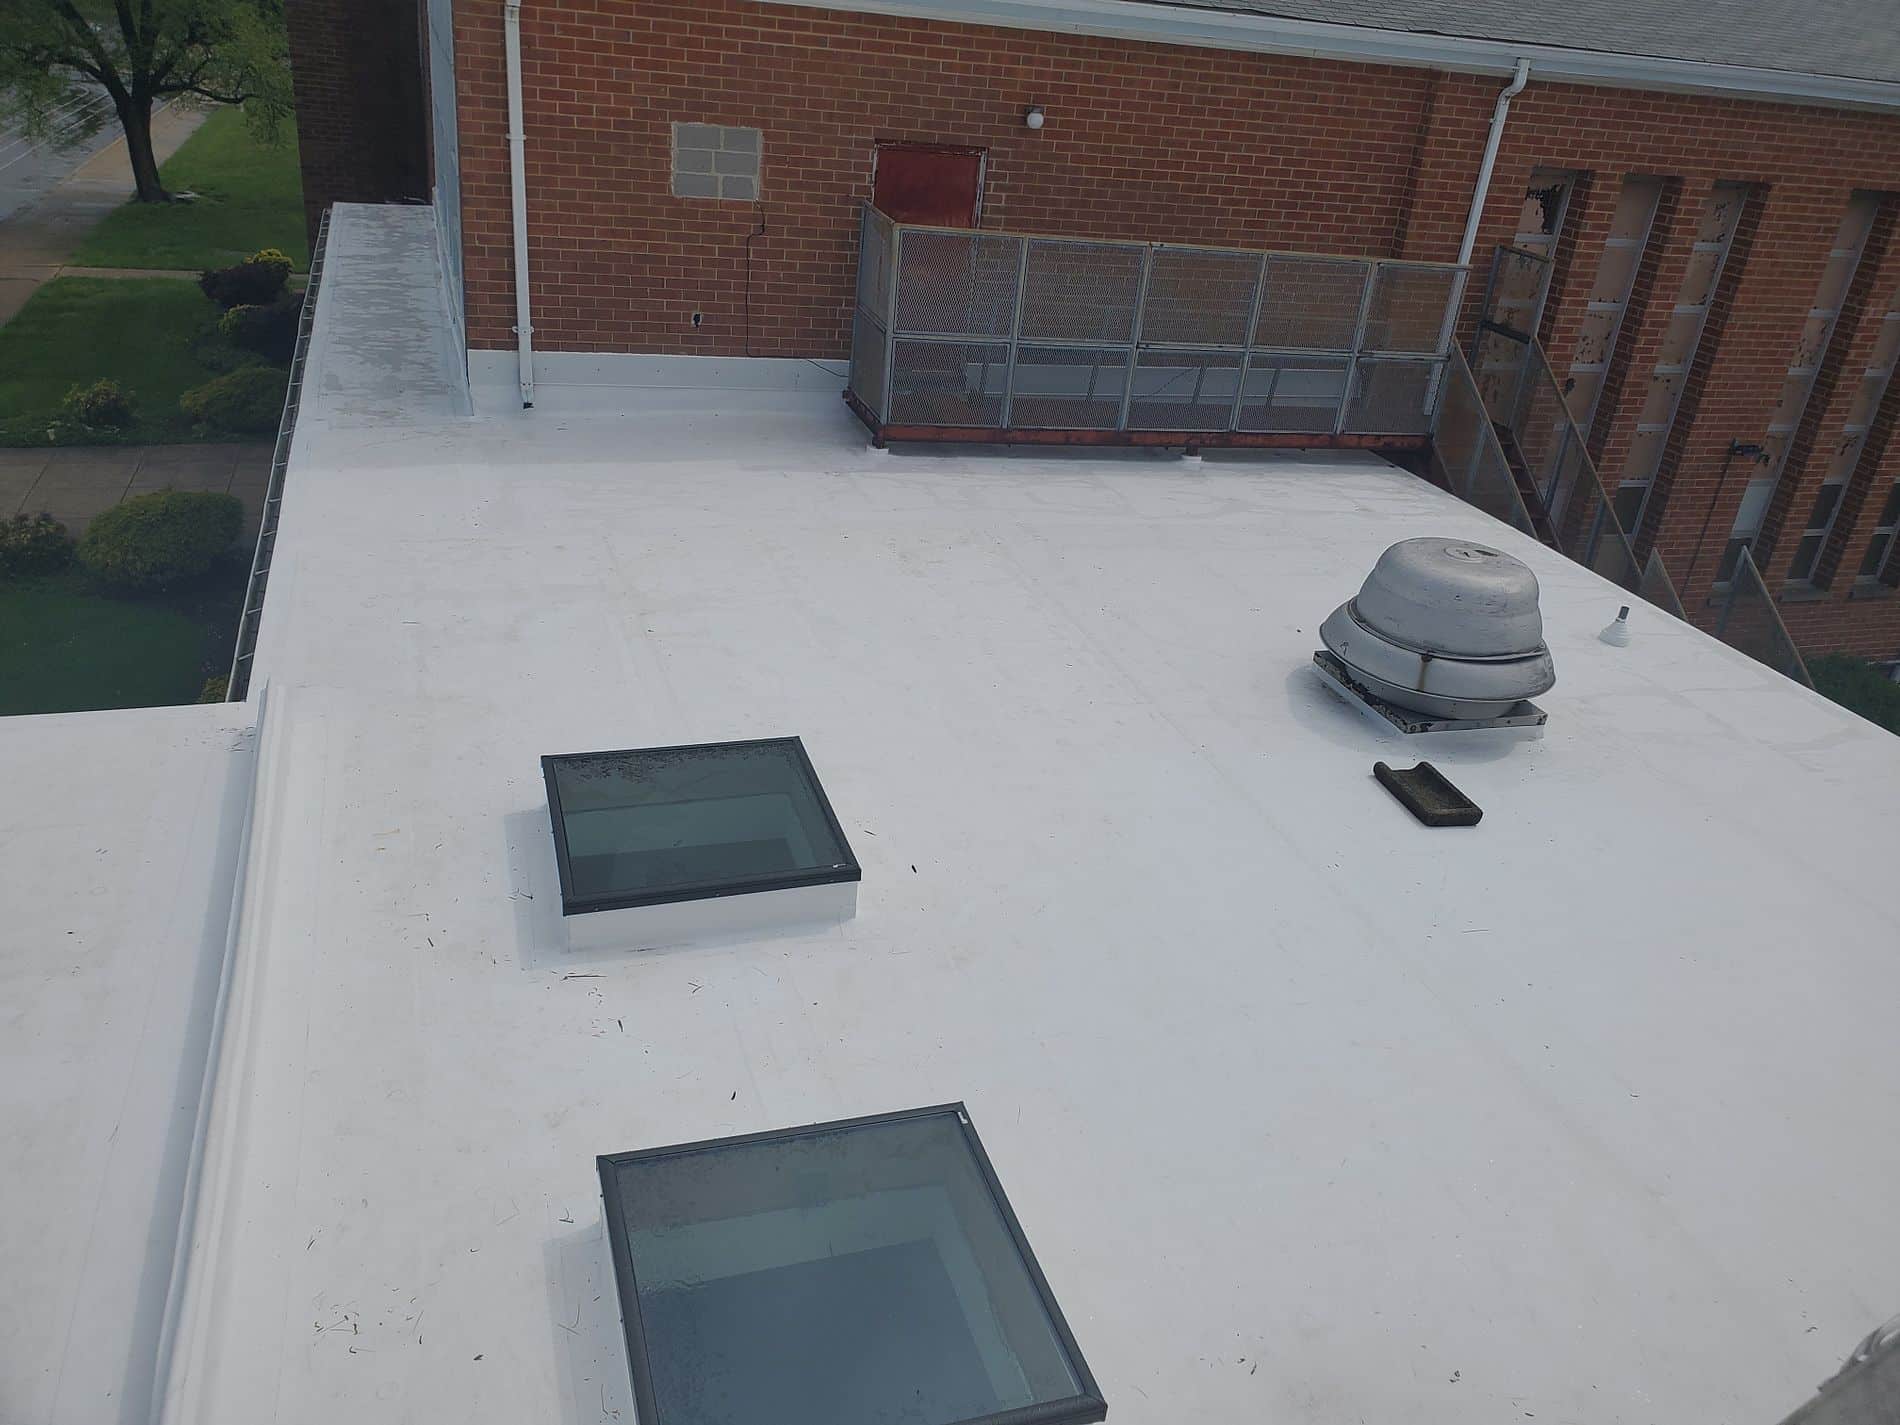 Newly installed flat roofing in Gaithersburg, MD's commercial building